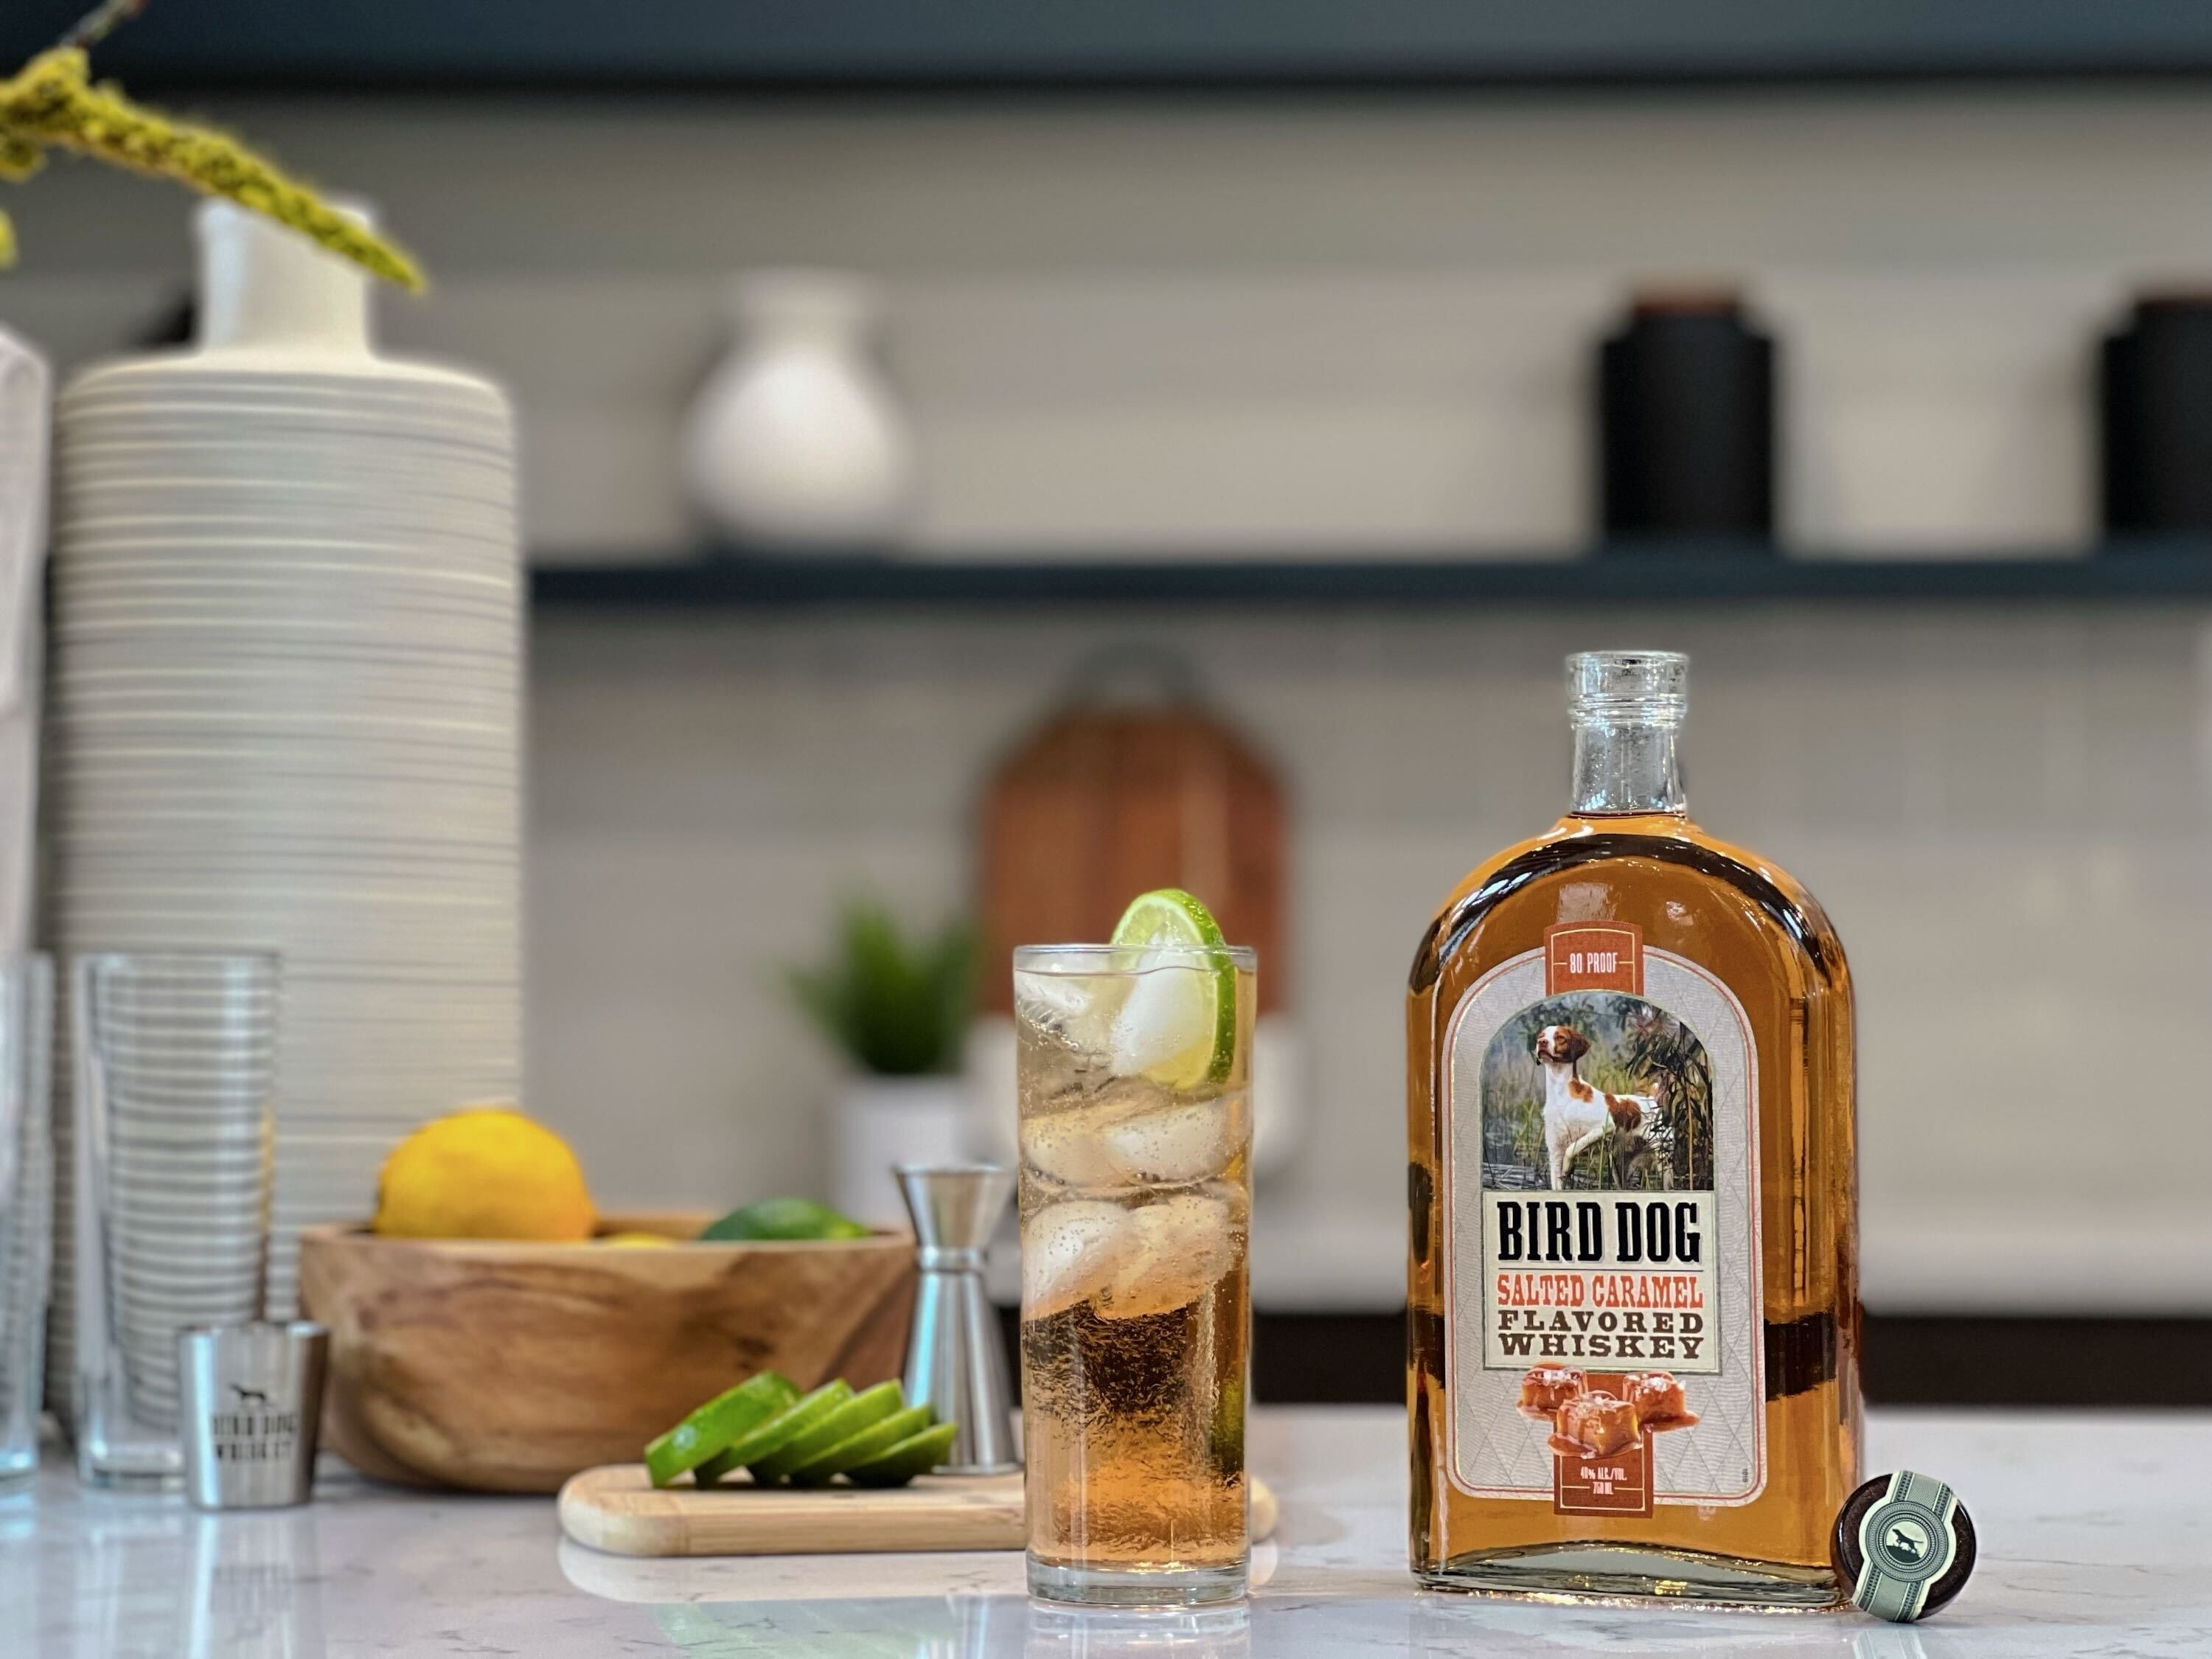 Bird Dog Salted Caramel Flavored Whiskey next to a cocktail in a glass on a kitchen counter